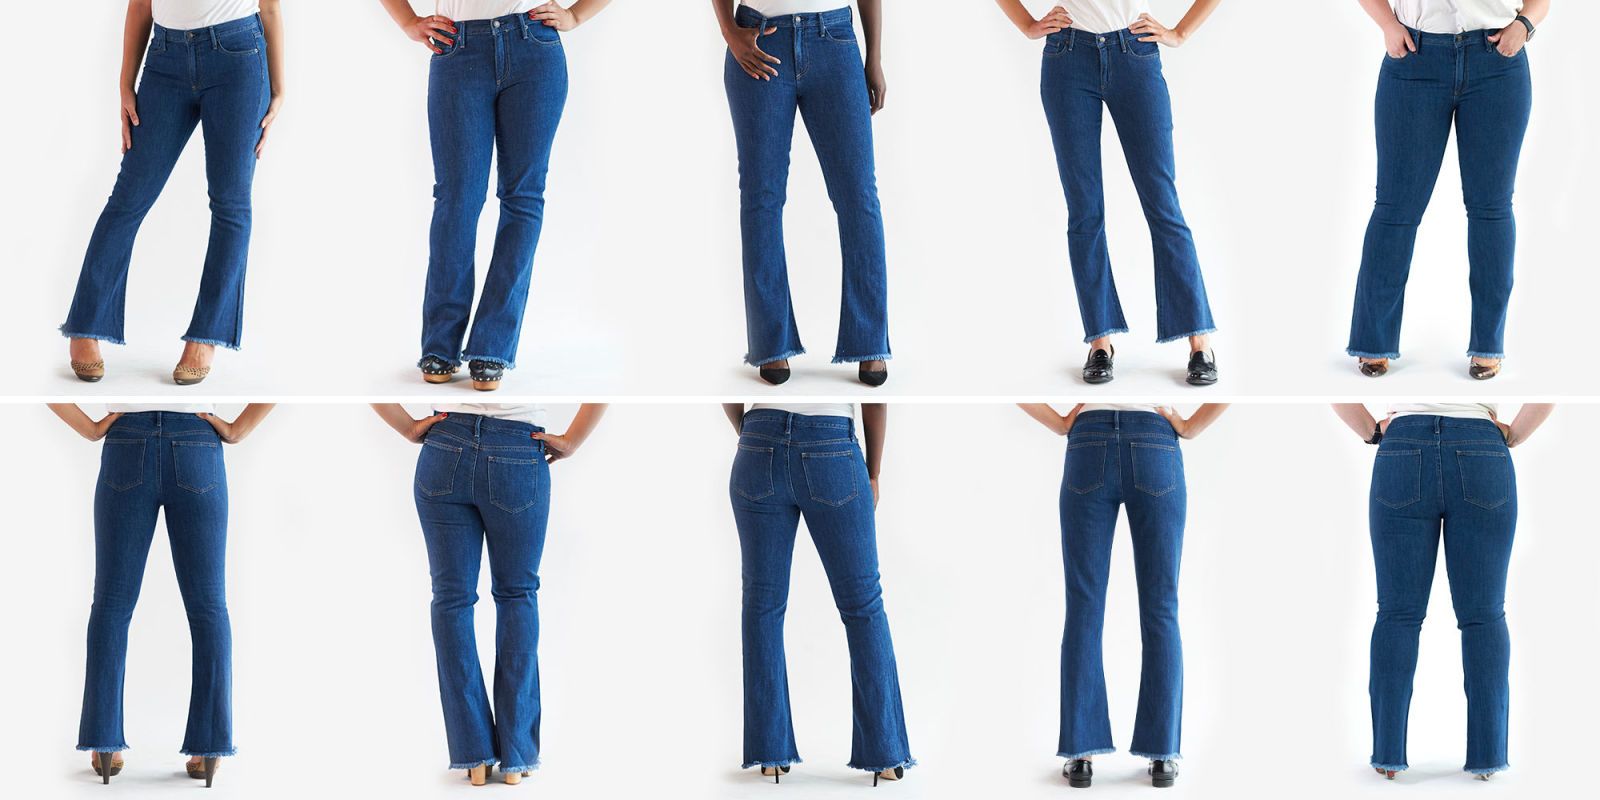 The Different Types of Jeans for Both Men and Women | Gianni Kavanagh